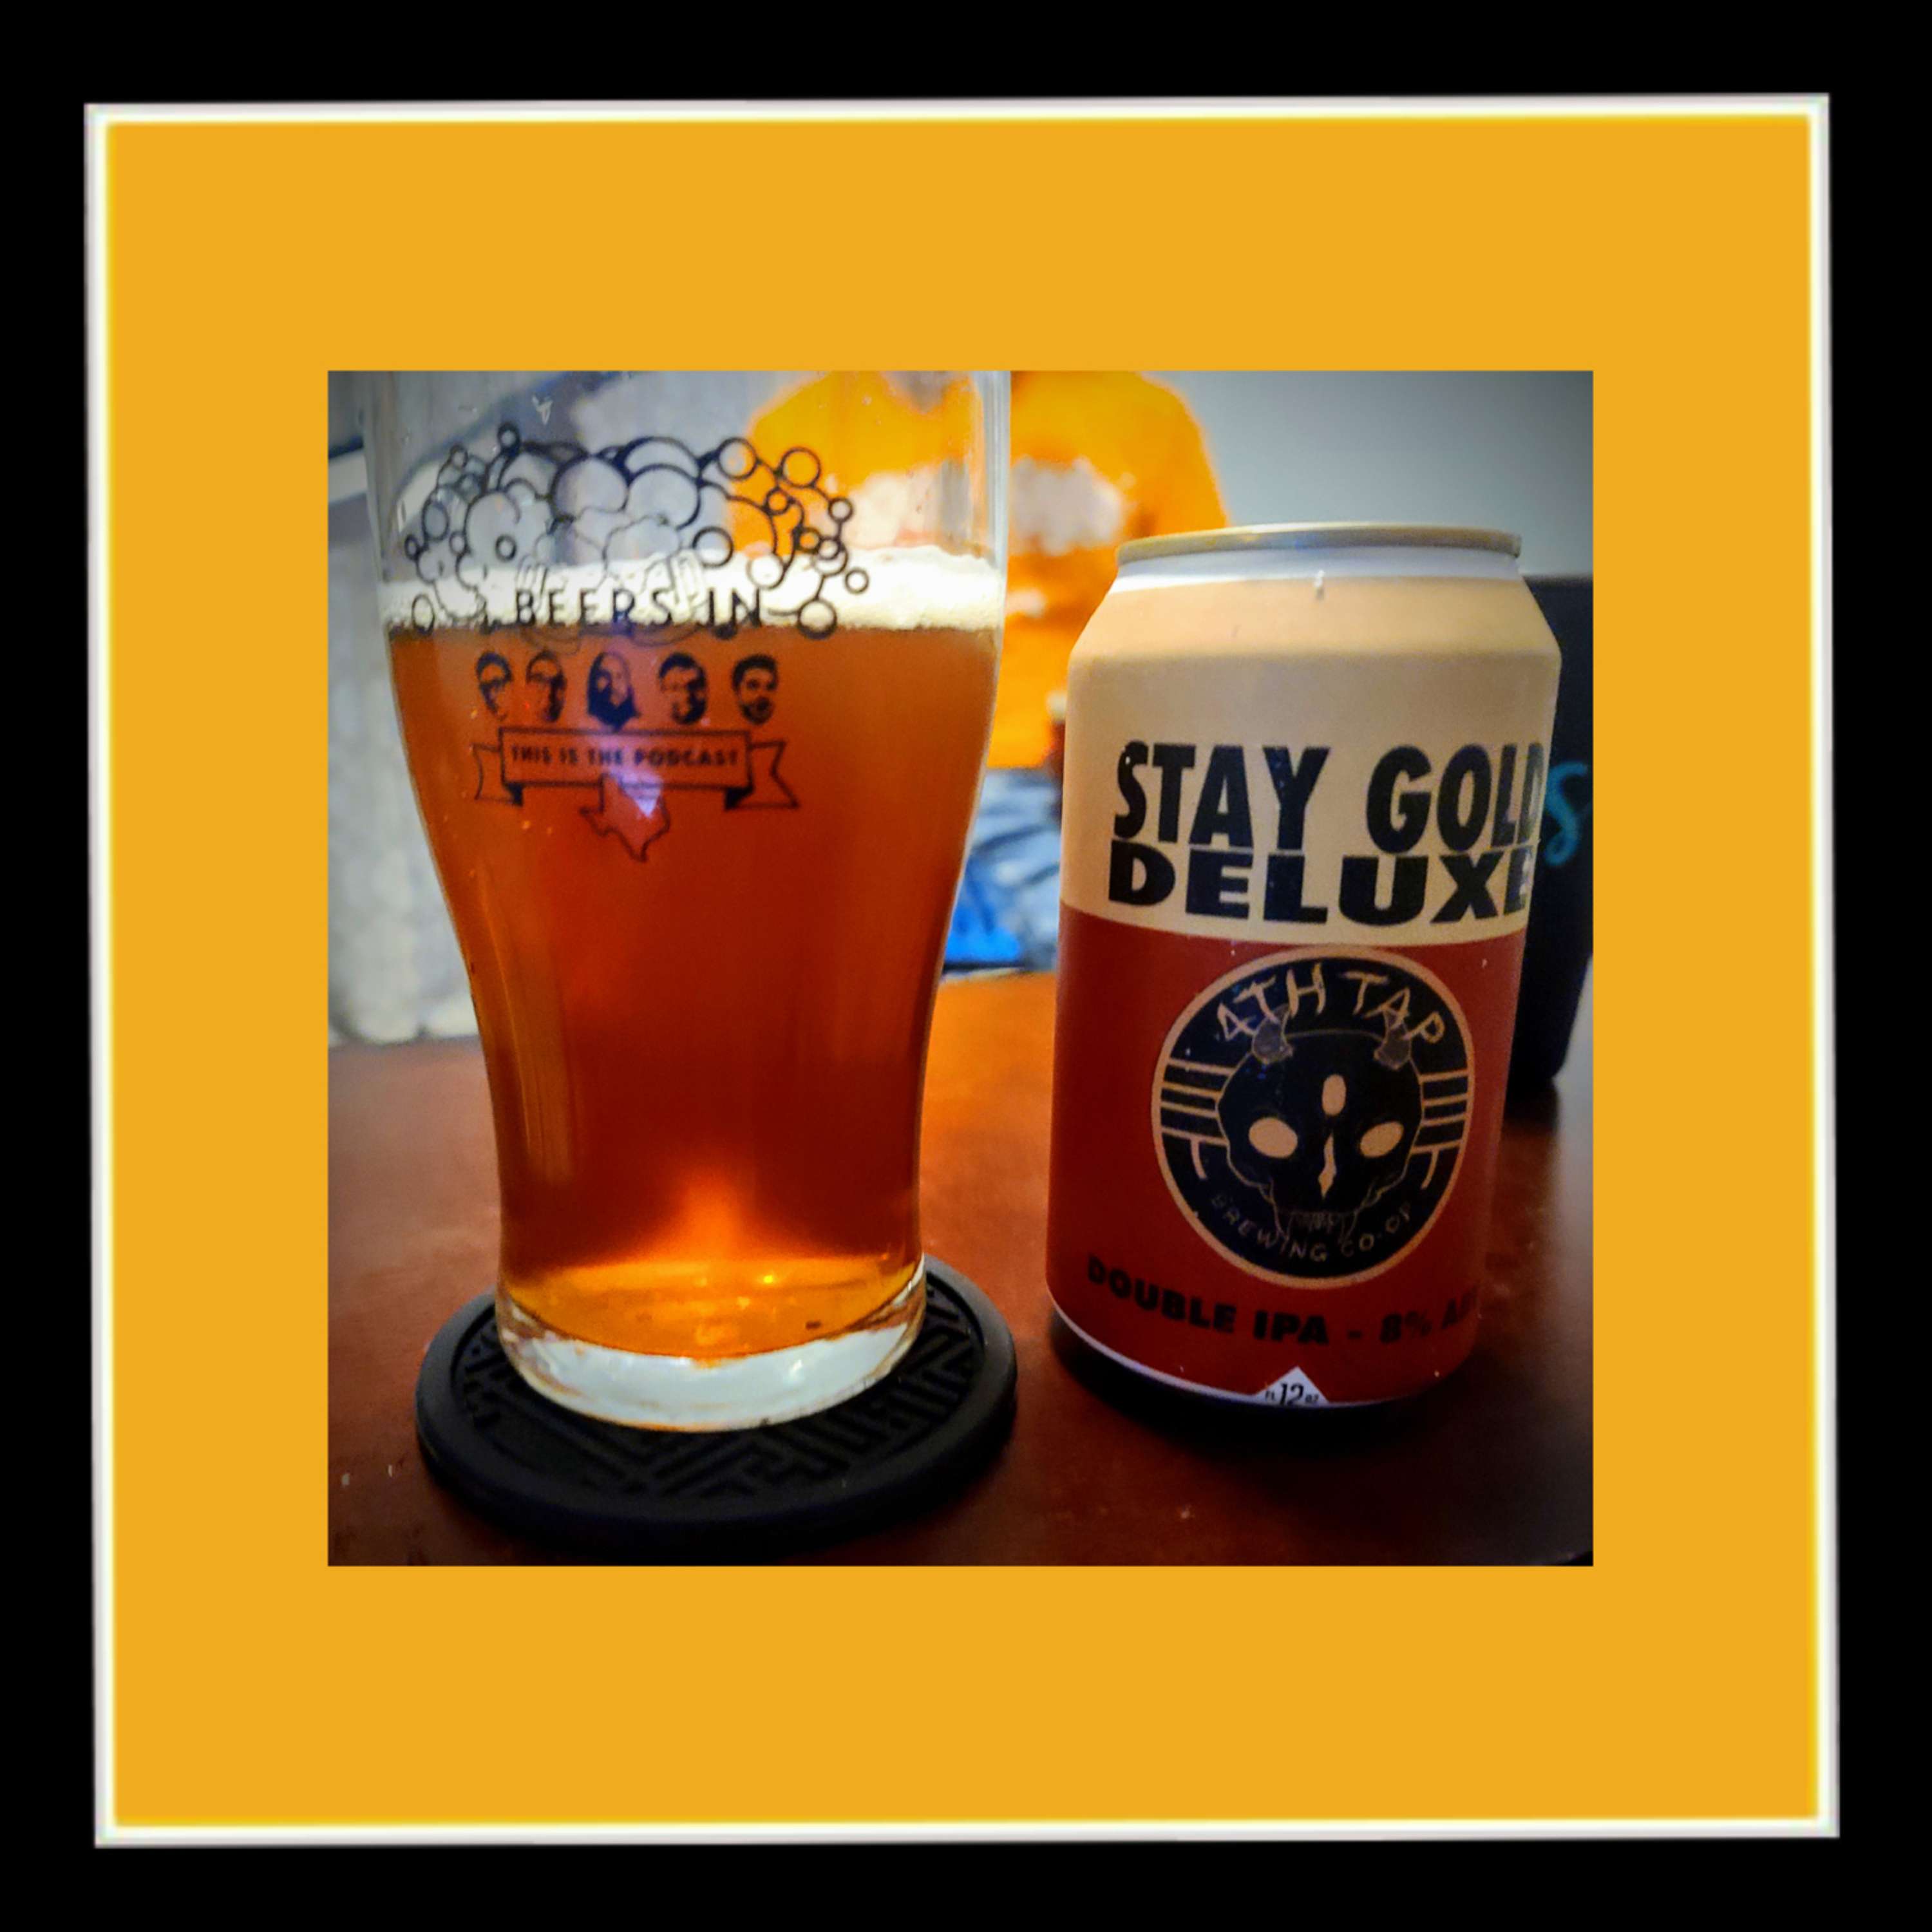 4th Tap Brewing Co-Op and Black Pumas - Stay Gold Deluxe Double IPA